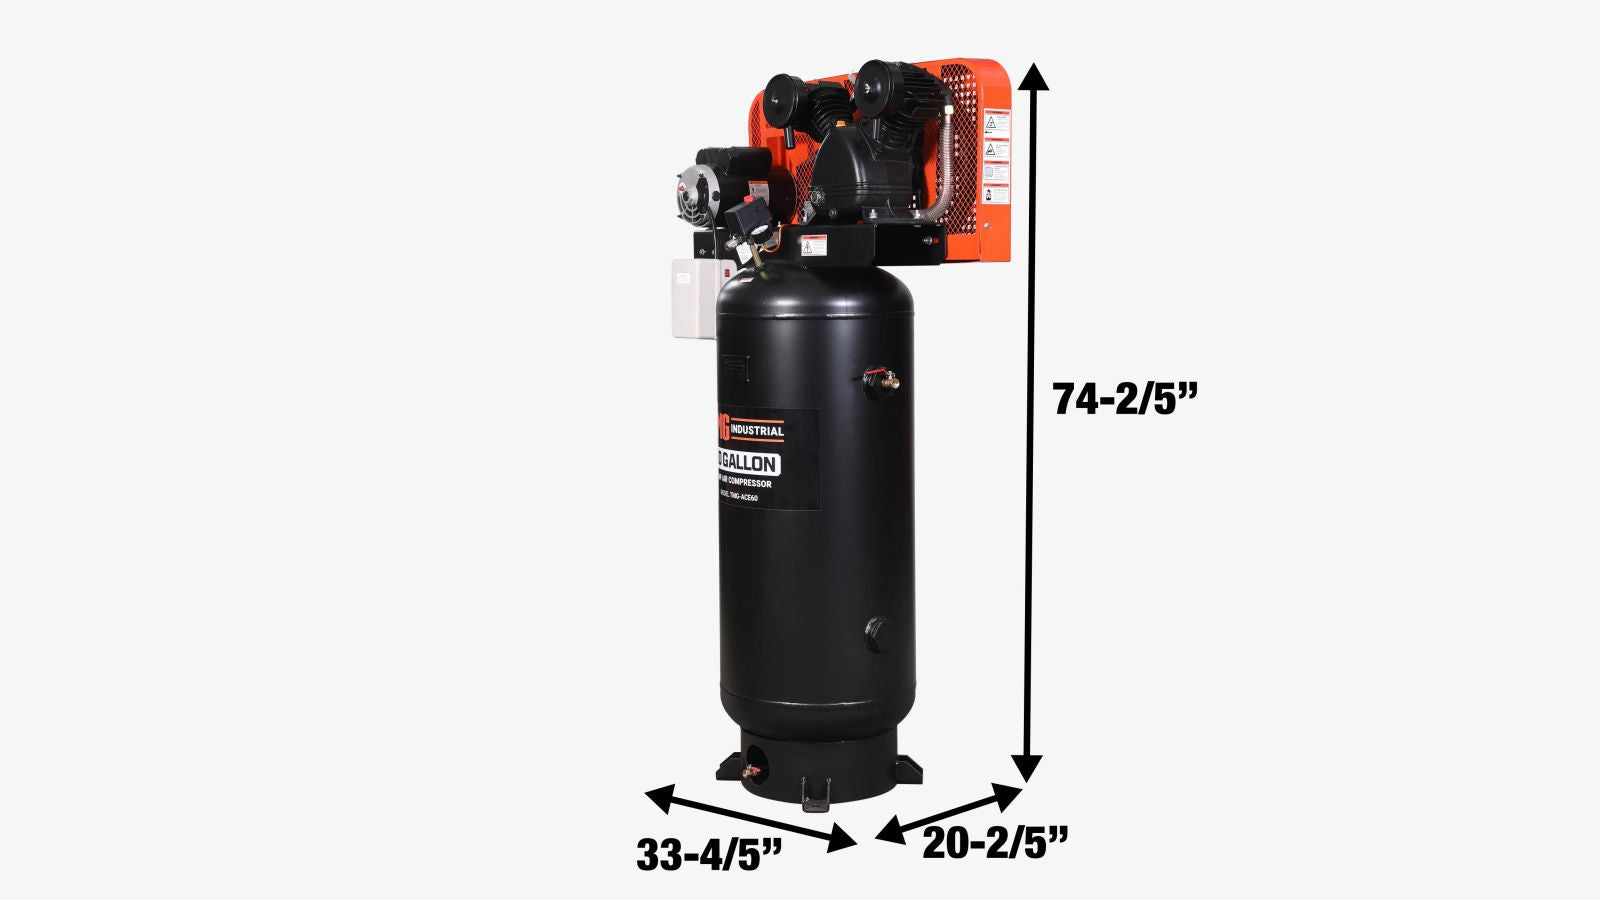 TMG Industrial 60 Gallon 5 HP Stationary Electric Air Compressor, 5 Min Fill Time, 230V Induction Motor, ASME Vertical Tank, TMG-ACE60-specifications-image